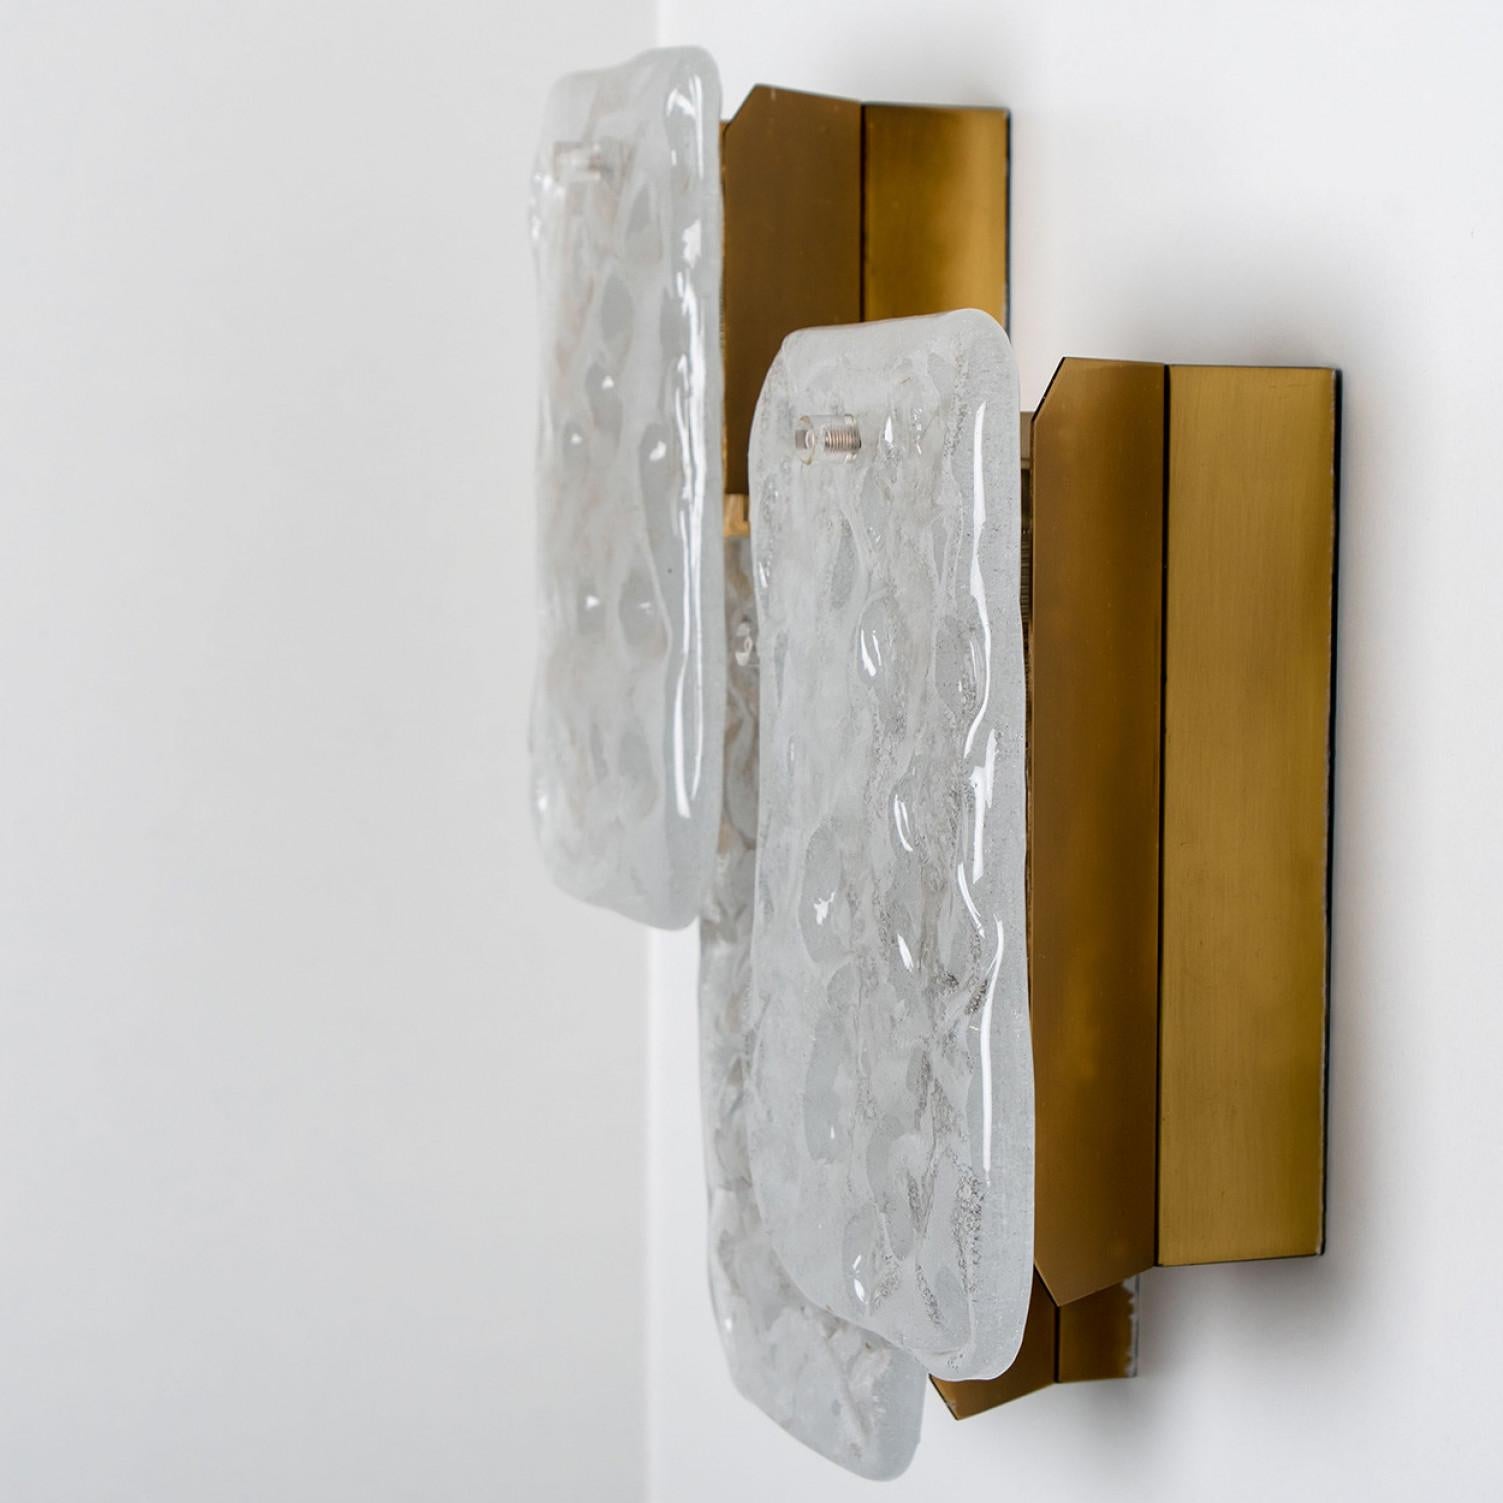 A stunning light fixture designed by J.T Kalmar, manufactured by Kalmar Franken, Austria in the 1960s.
High-end handmade design from the 20th century. The three large rectangles of white, opaque textured glass provide a nicely diffuse